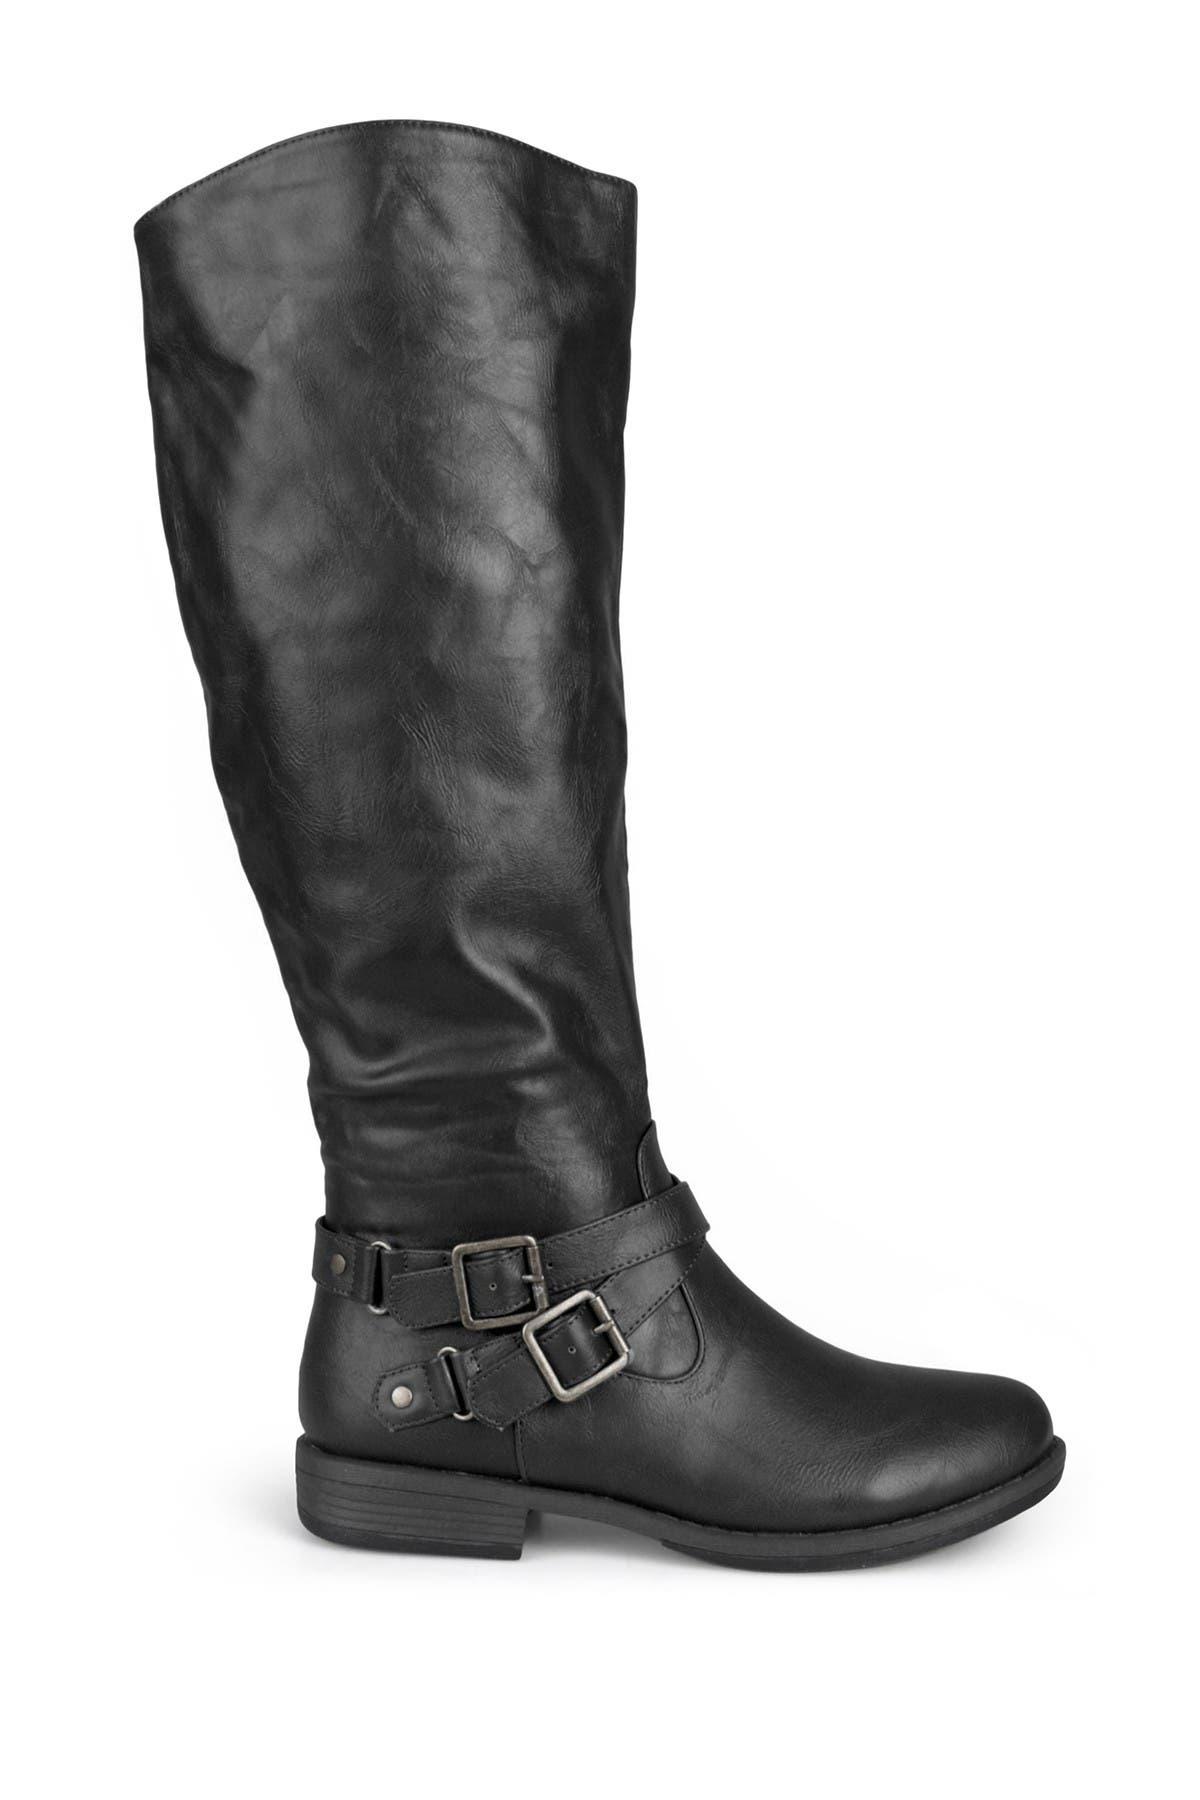 journee collection april riding boot